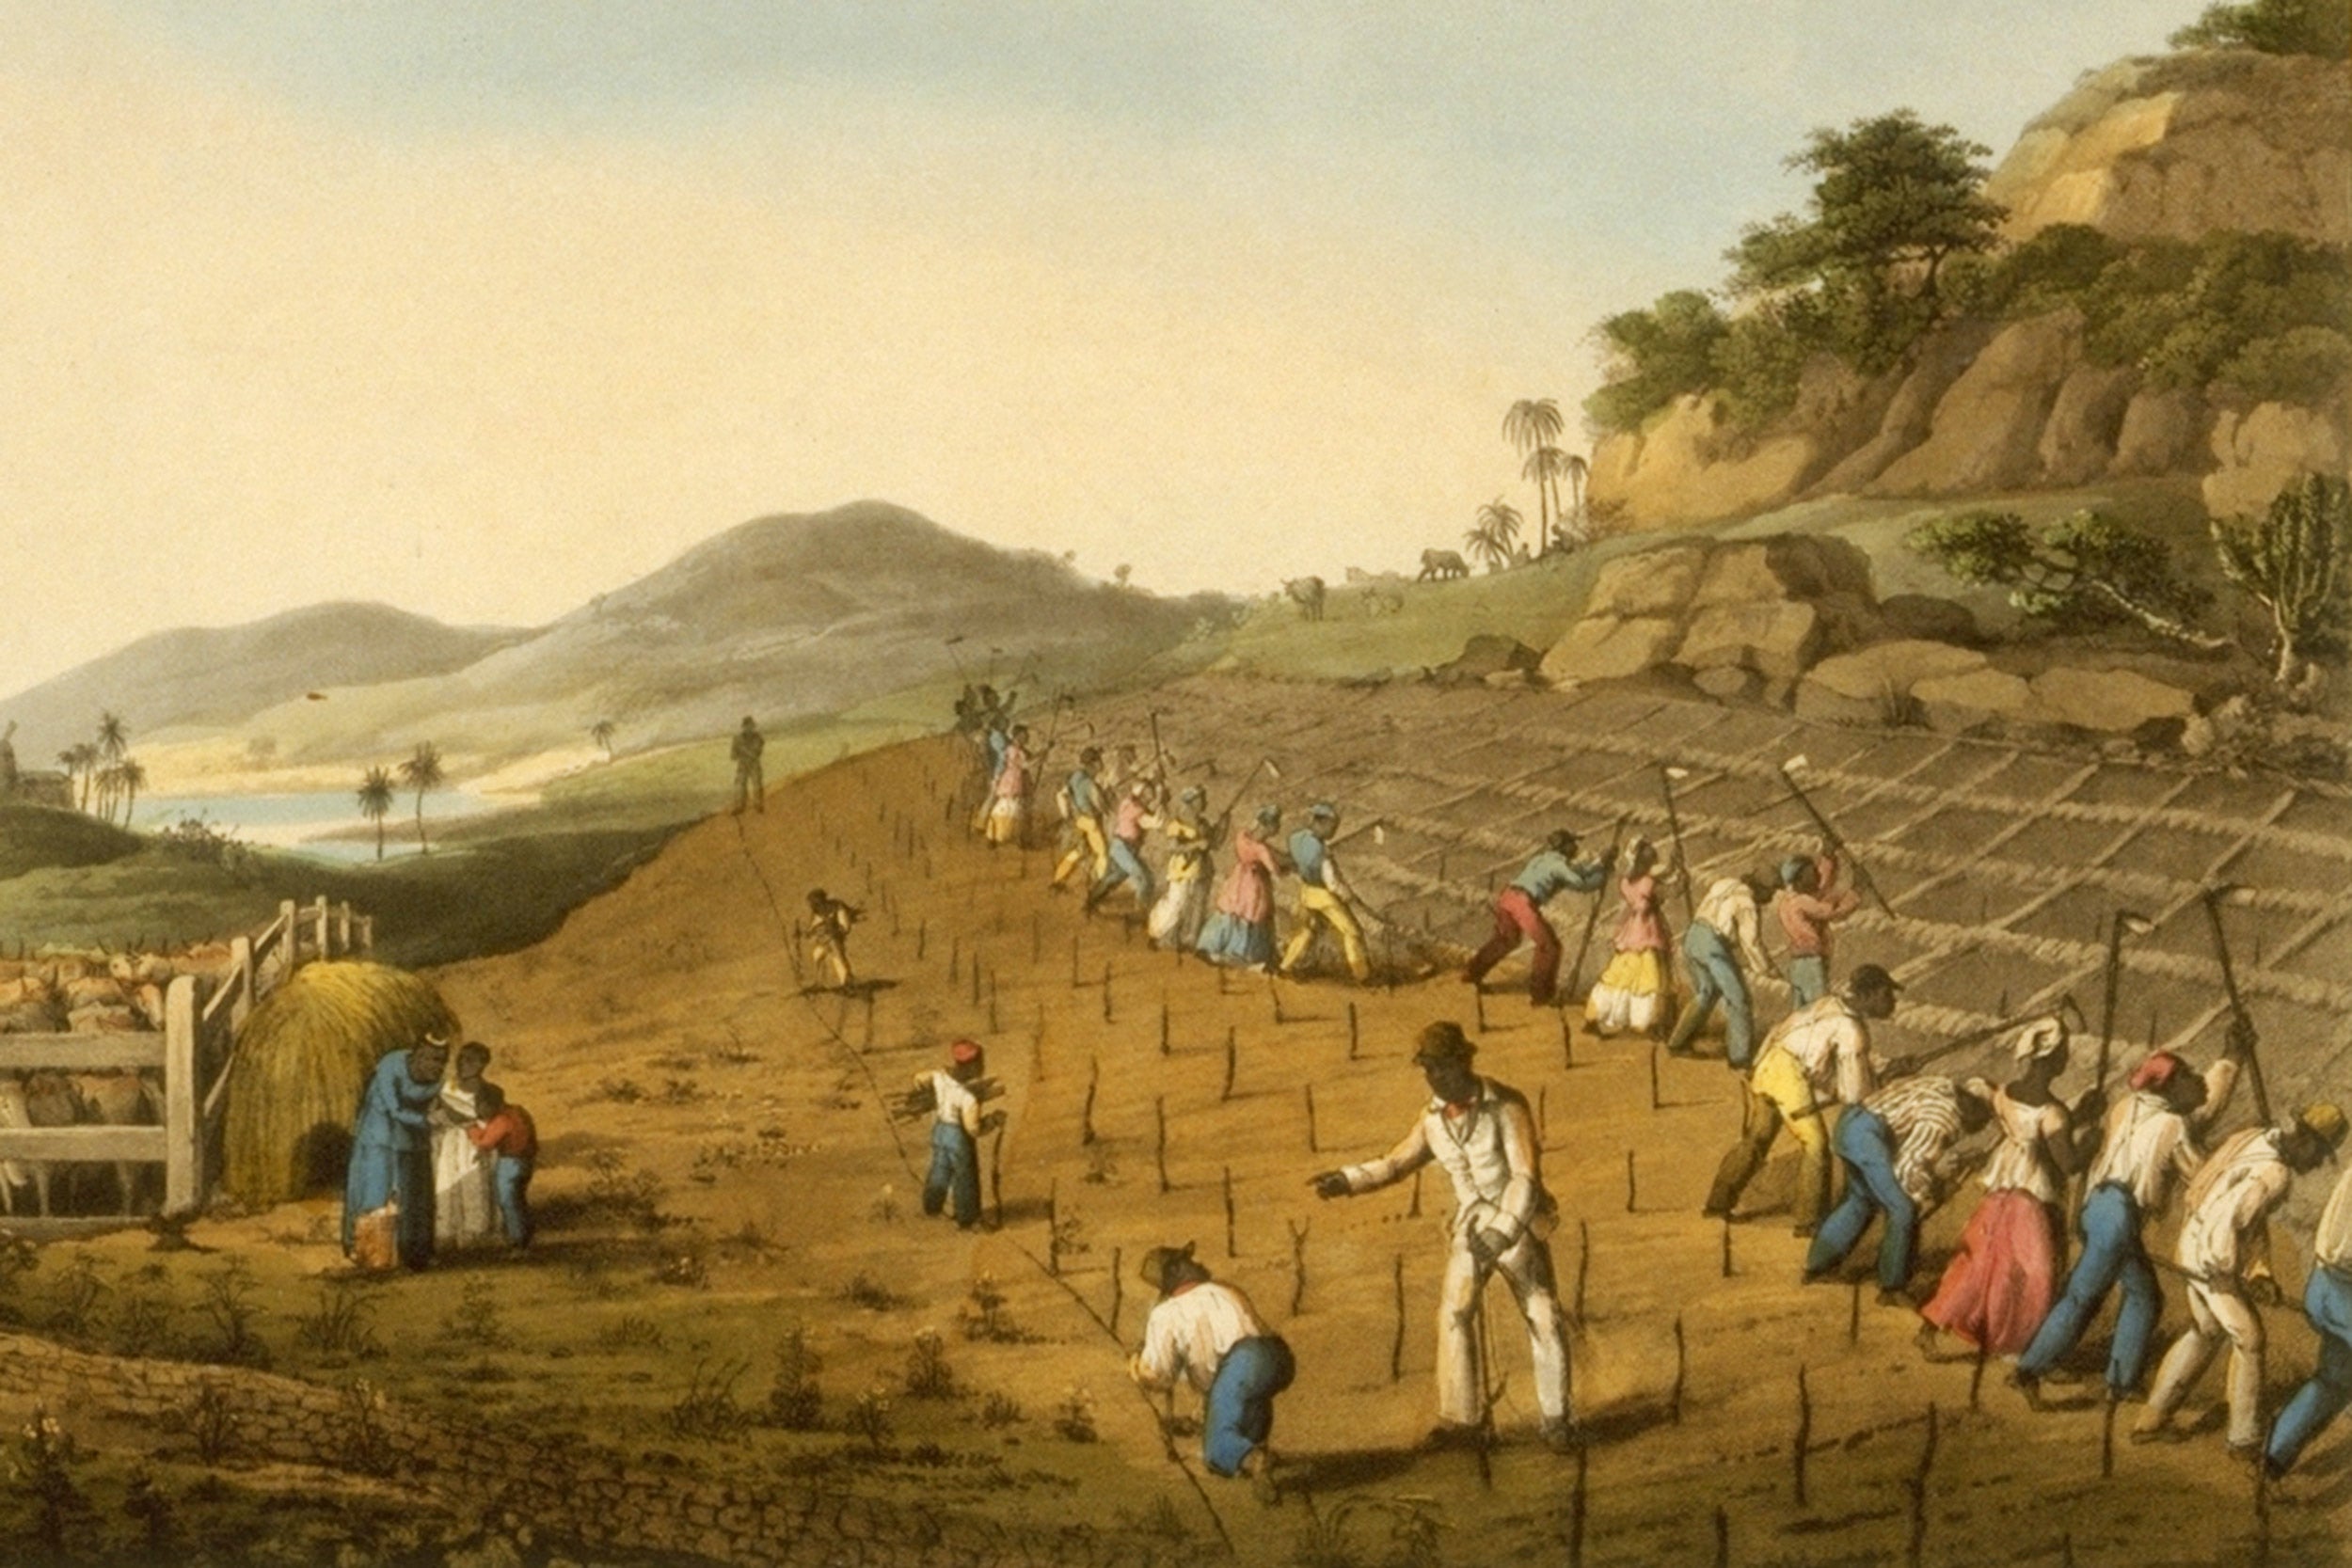 “Digging Holes for Planting Sugar Cane, Antigua, West Indies, 182